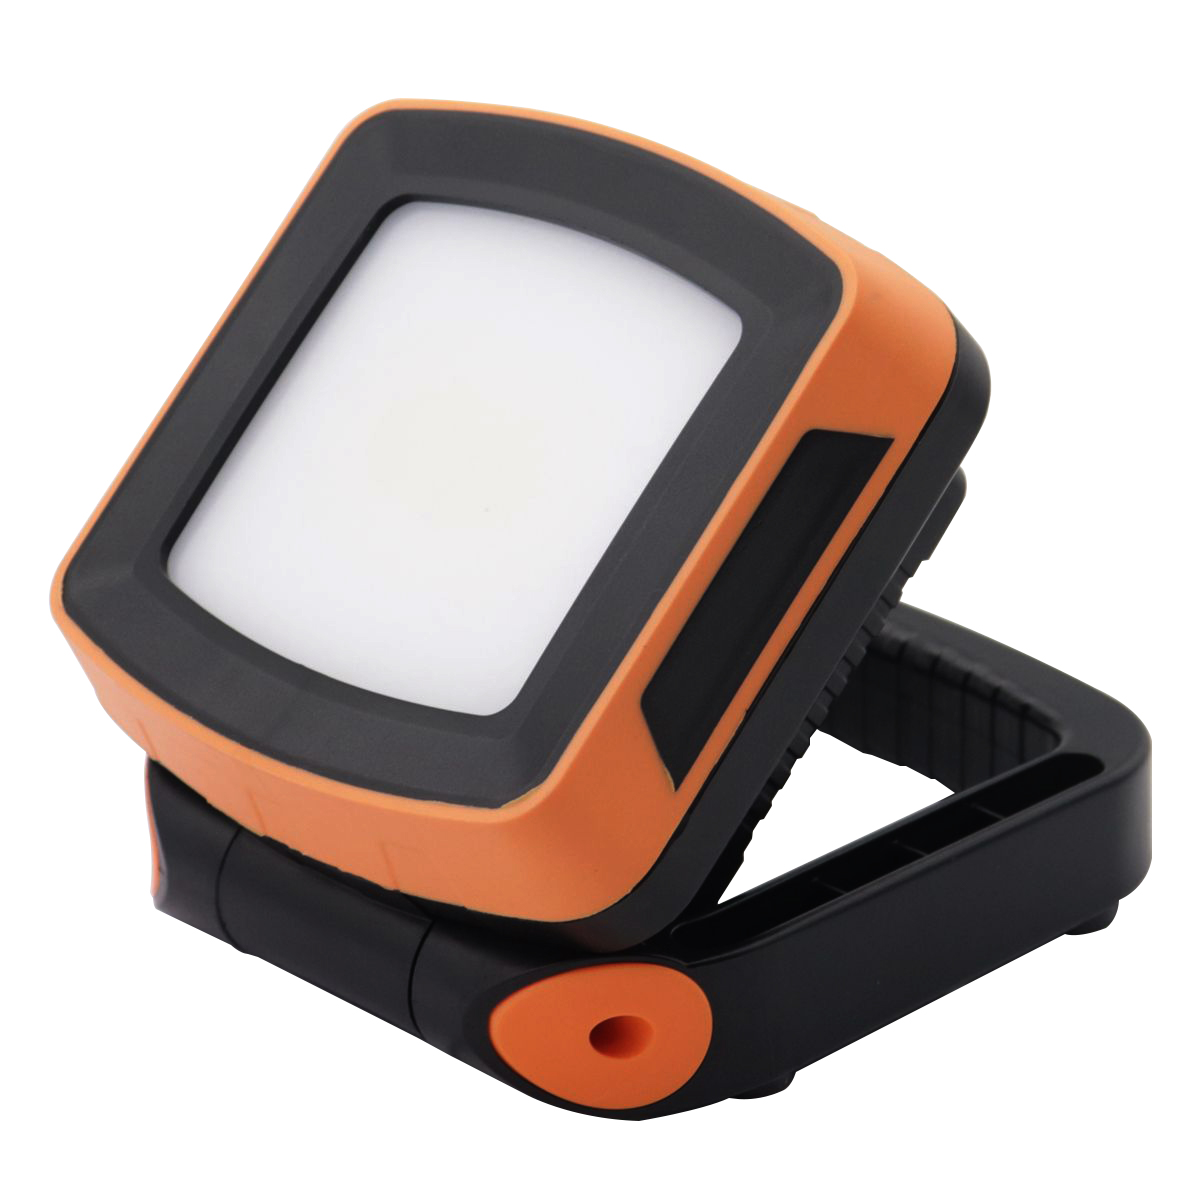 Universal Portable Led Work Light 5.5w Rechargeable Hidden Hook 360-degree Free Rotation Lamp